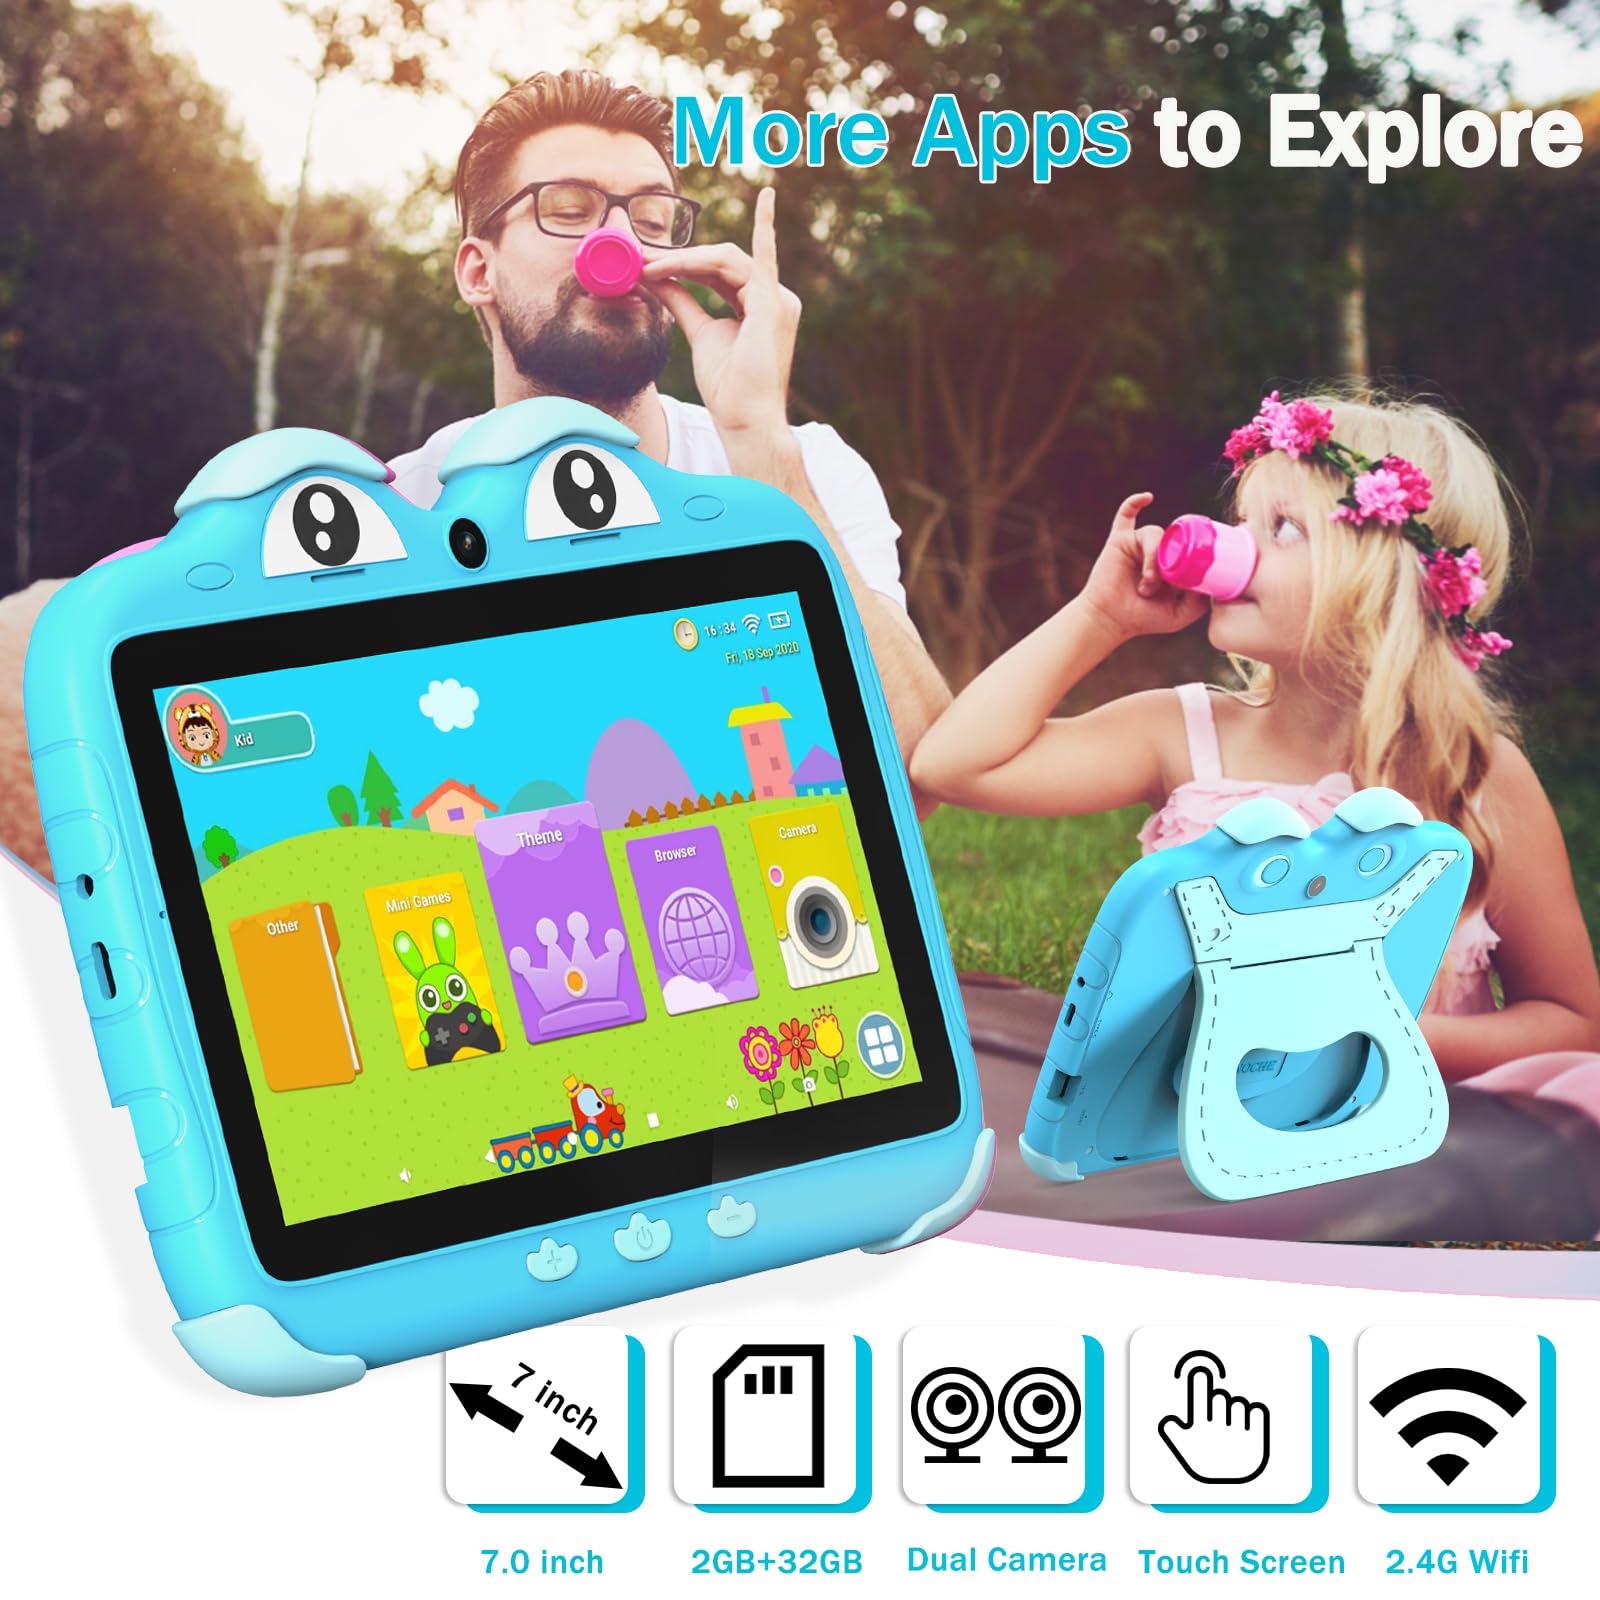 YINOCHE Kids Tablet 7 inch Toddler Tablet for Kids Android Tablet for Toddlers Kids Learning Tablet WiFi Children's Tablet with Parental Control 32G Shockproof Case Support YouTube Netflix